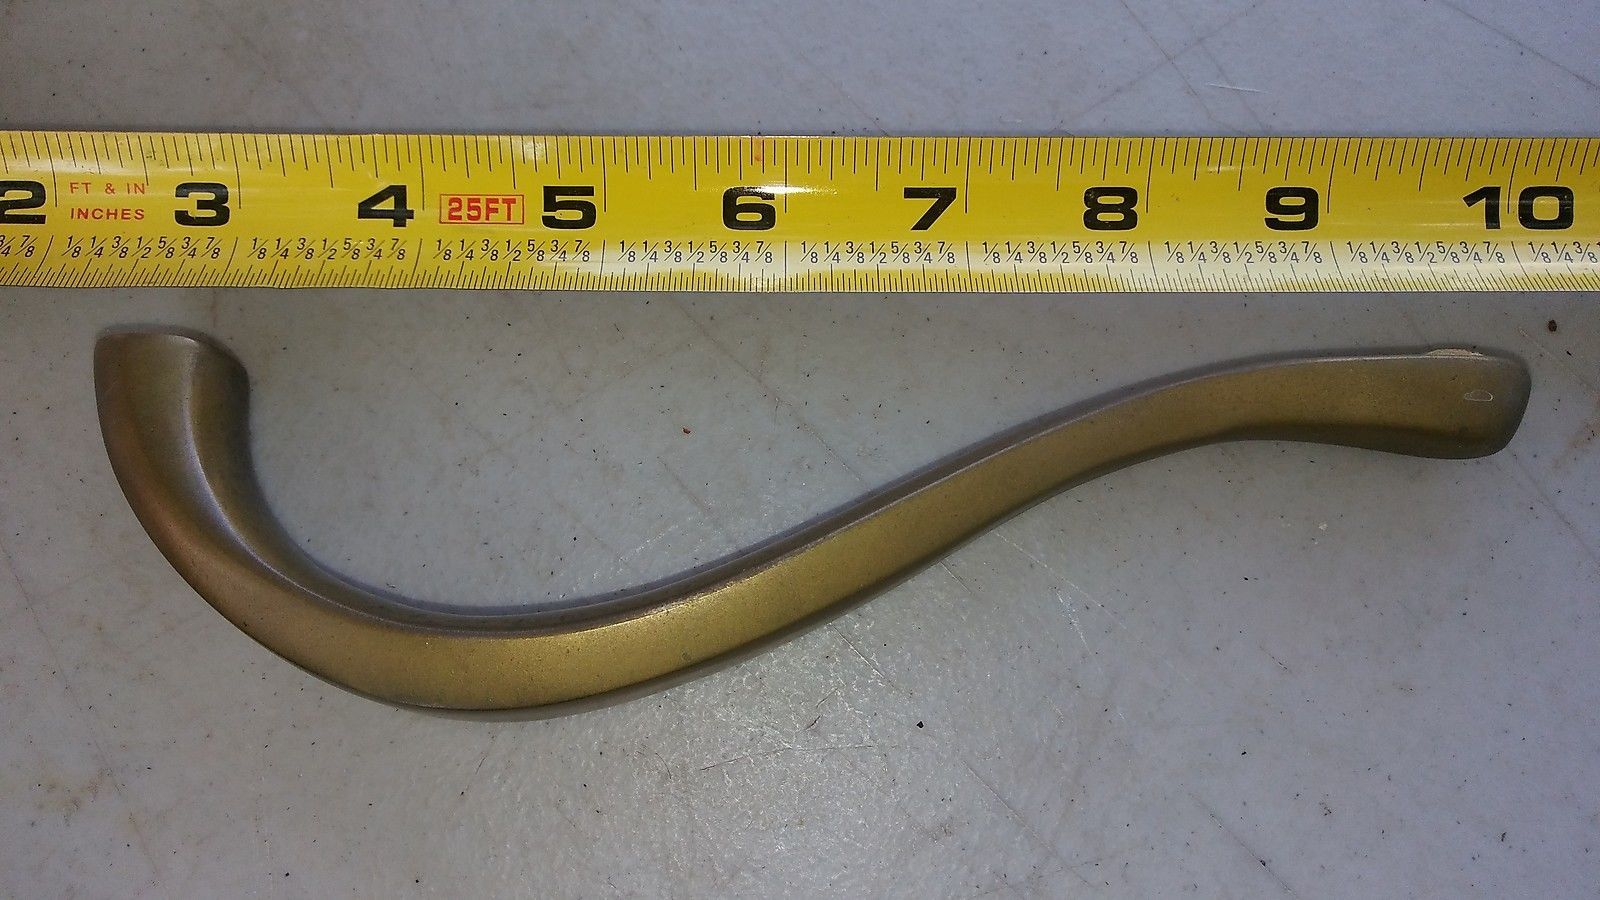 7CCC03 SOLID BRASS HANDLE, 11-1/2 OZ OF METAL, 7-1/2" X 1-7/8" X 7/8" OVERALL - $7.69